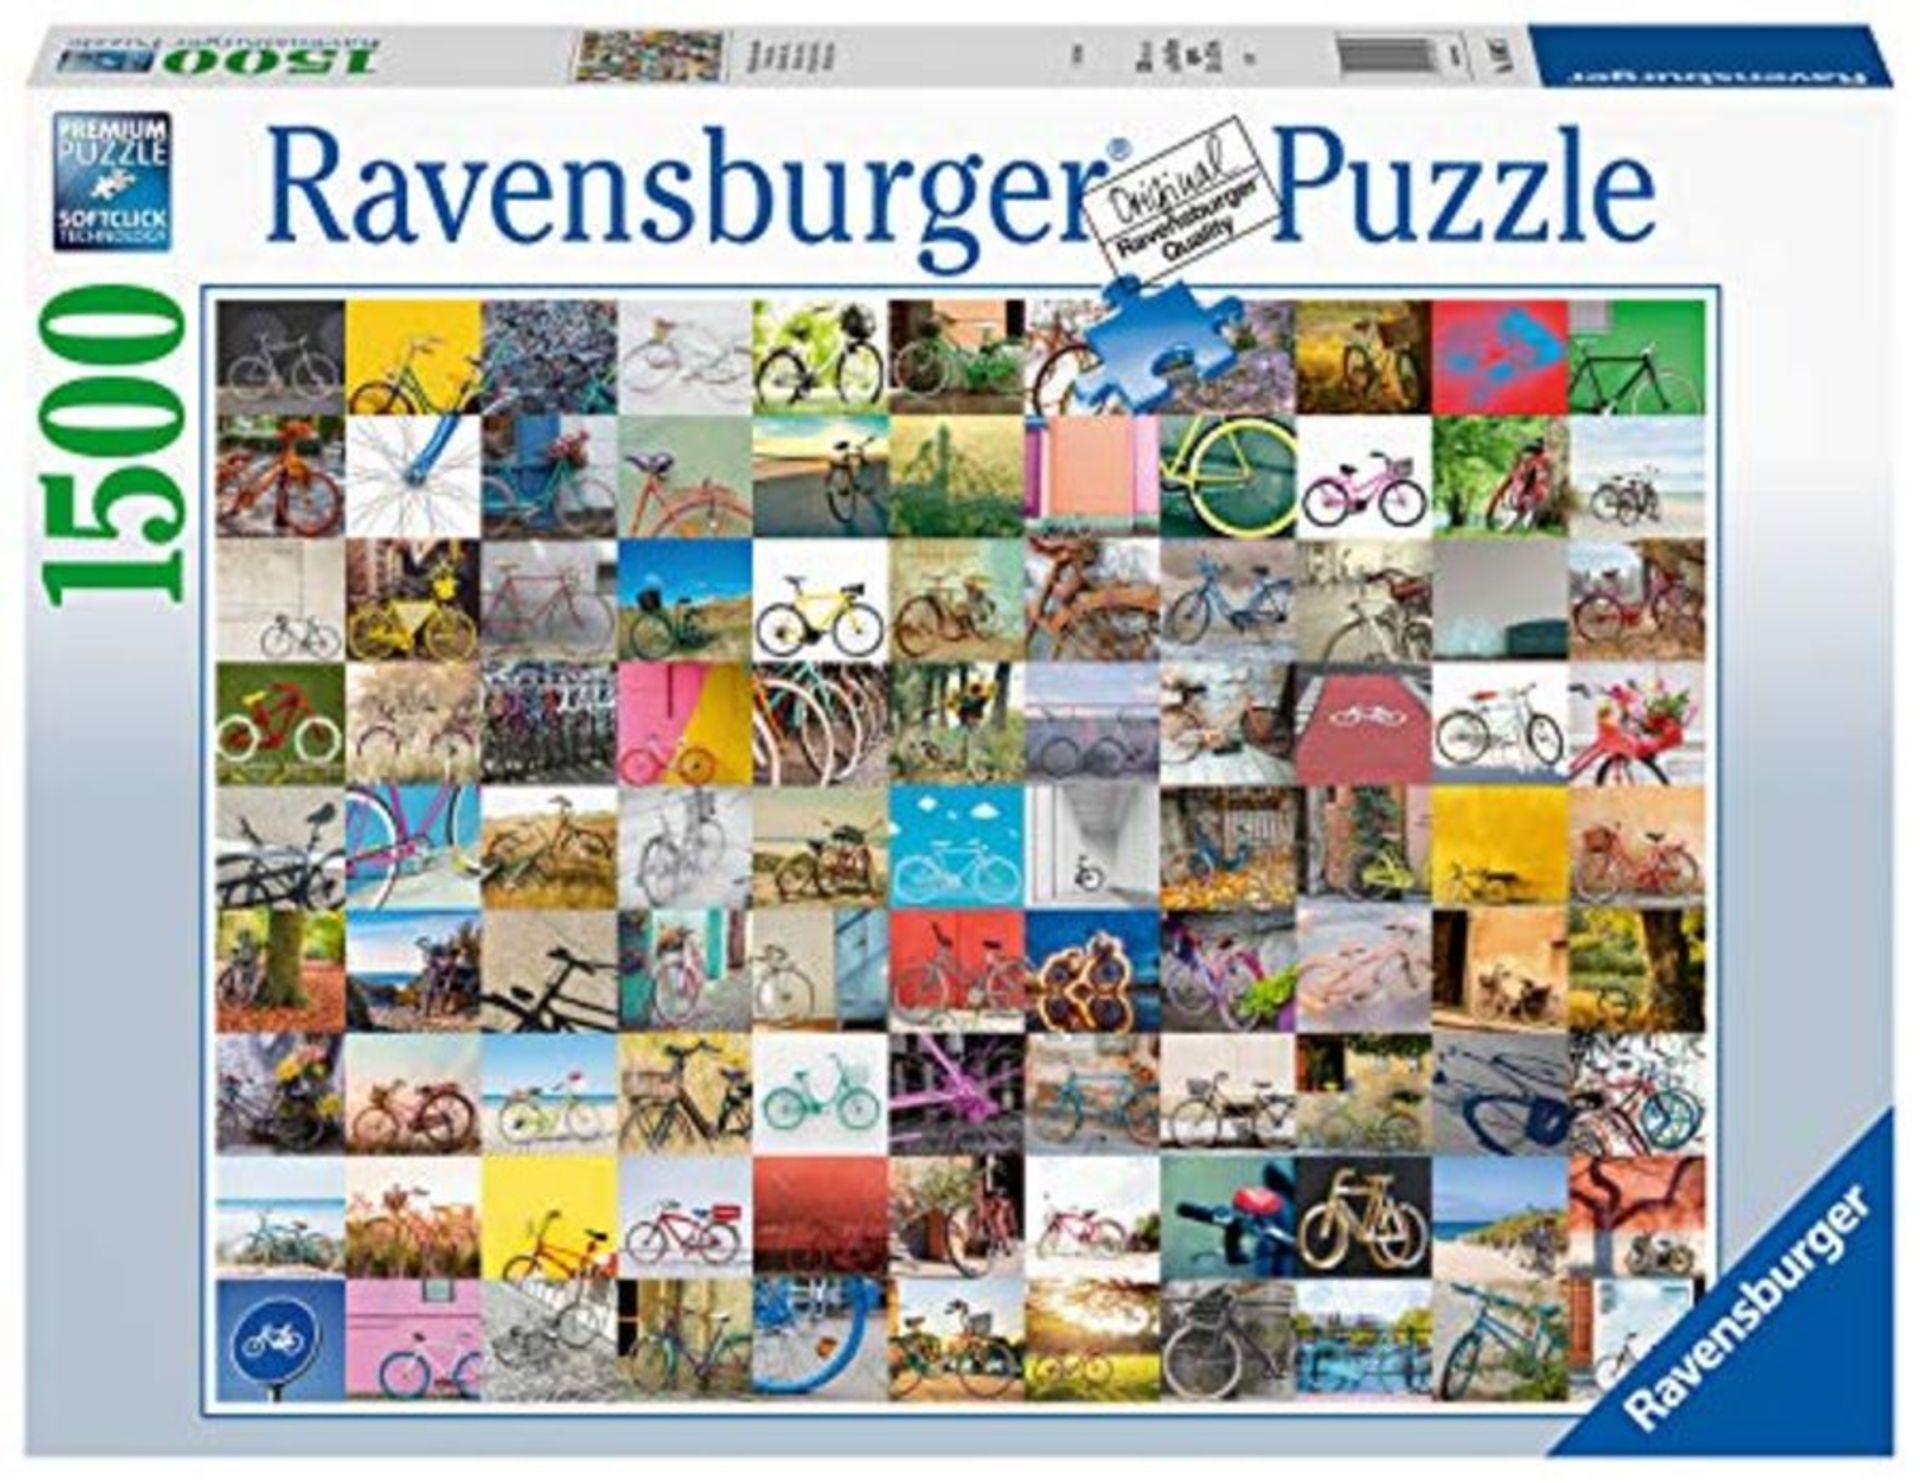 Ravensburger 16007 99 Bicycles 1500 Piece Jigsaw Puzzle for Adults & for Kids Age 12 a